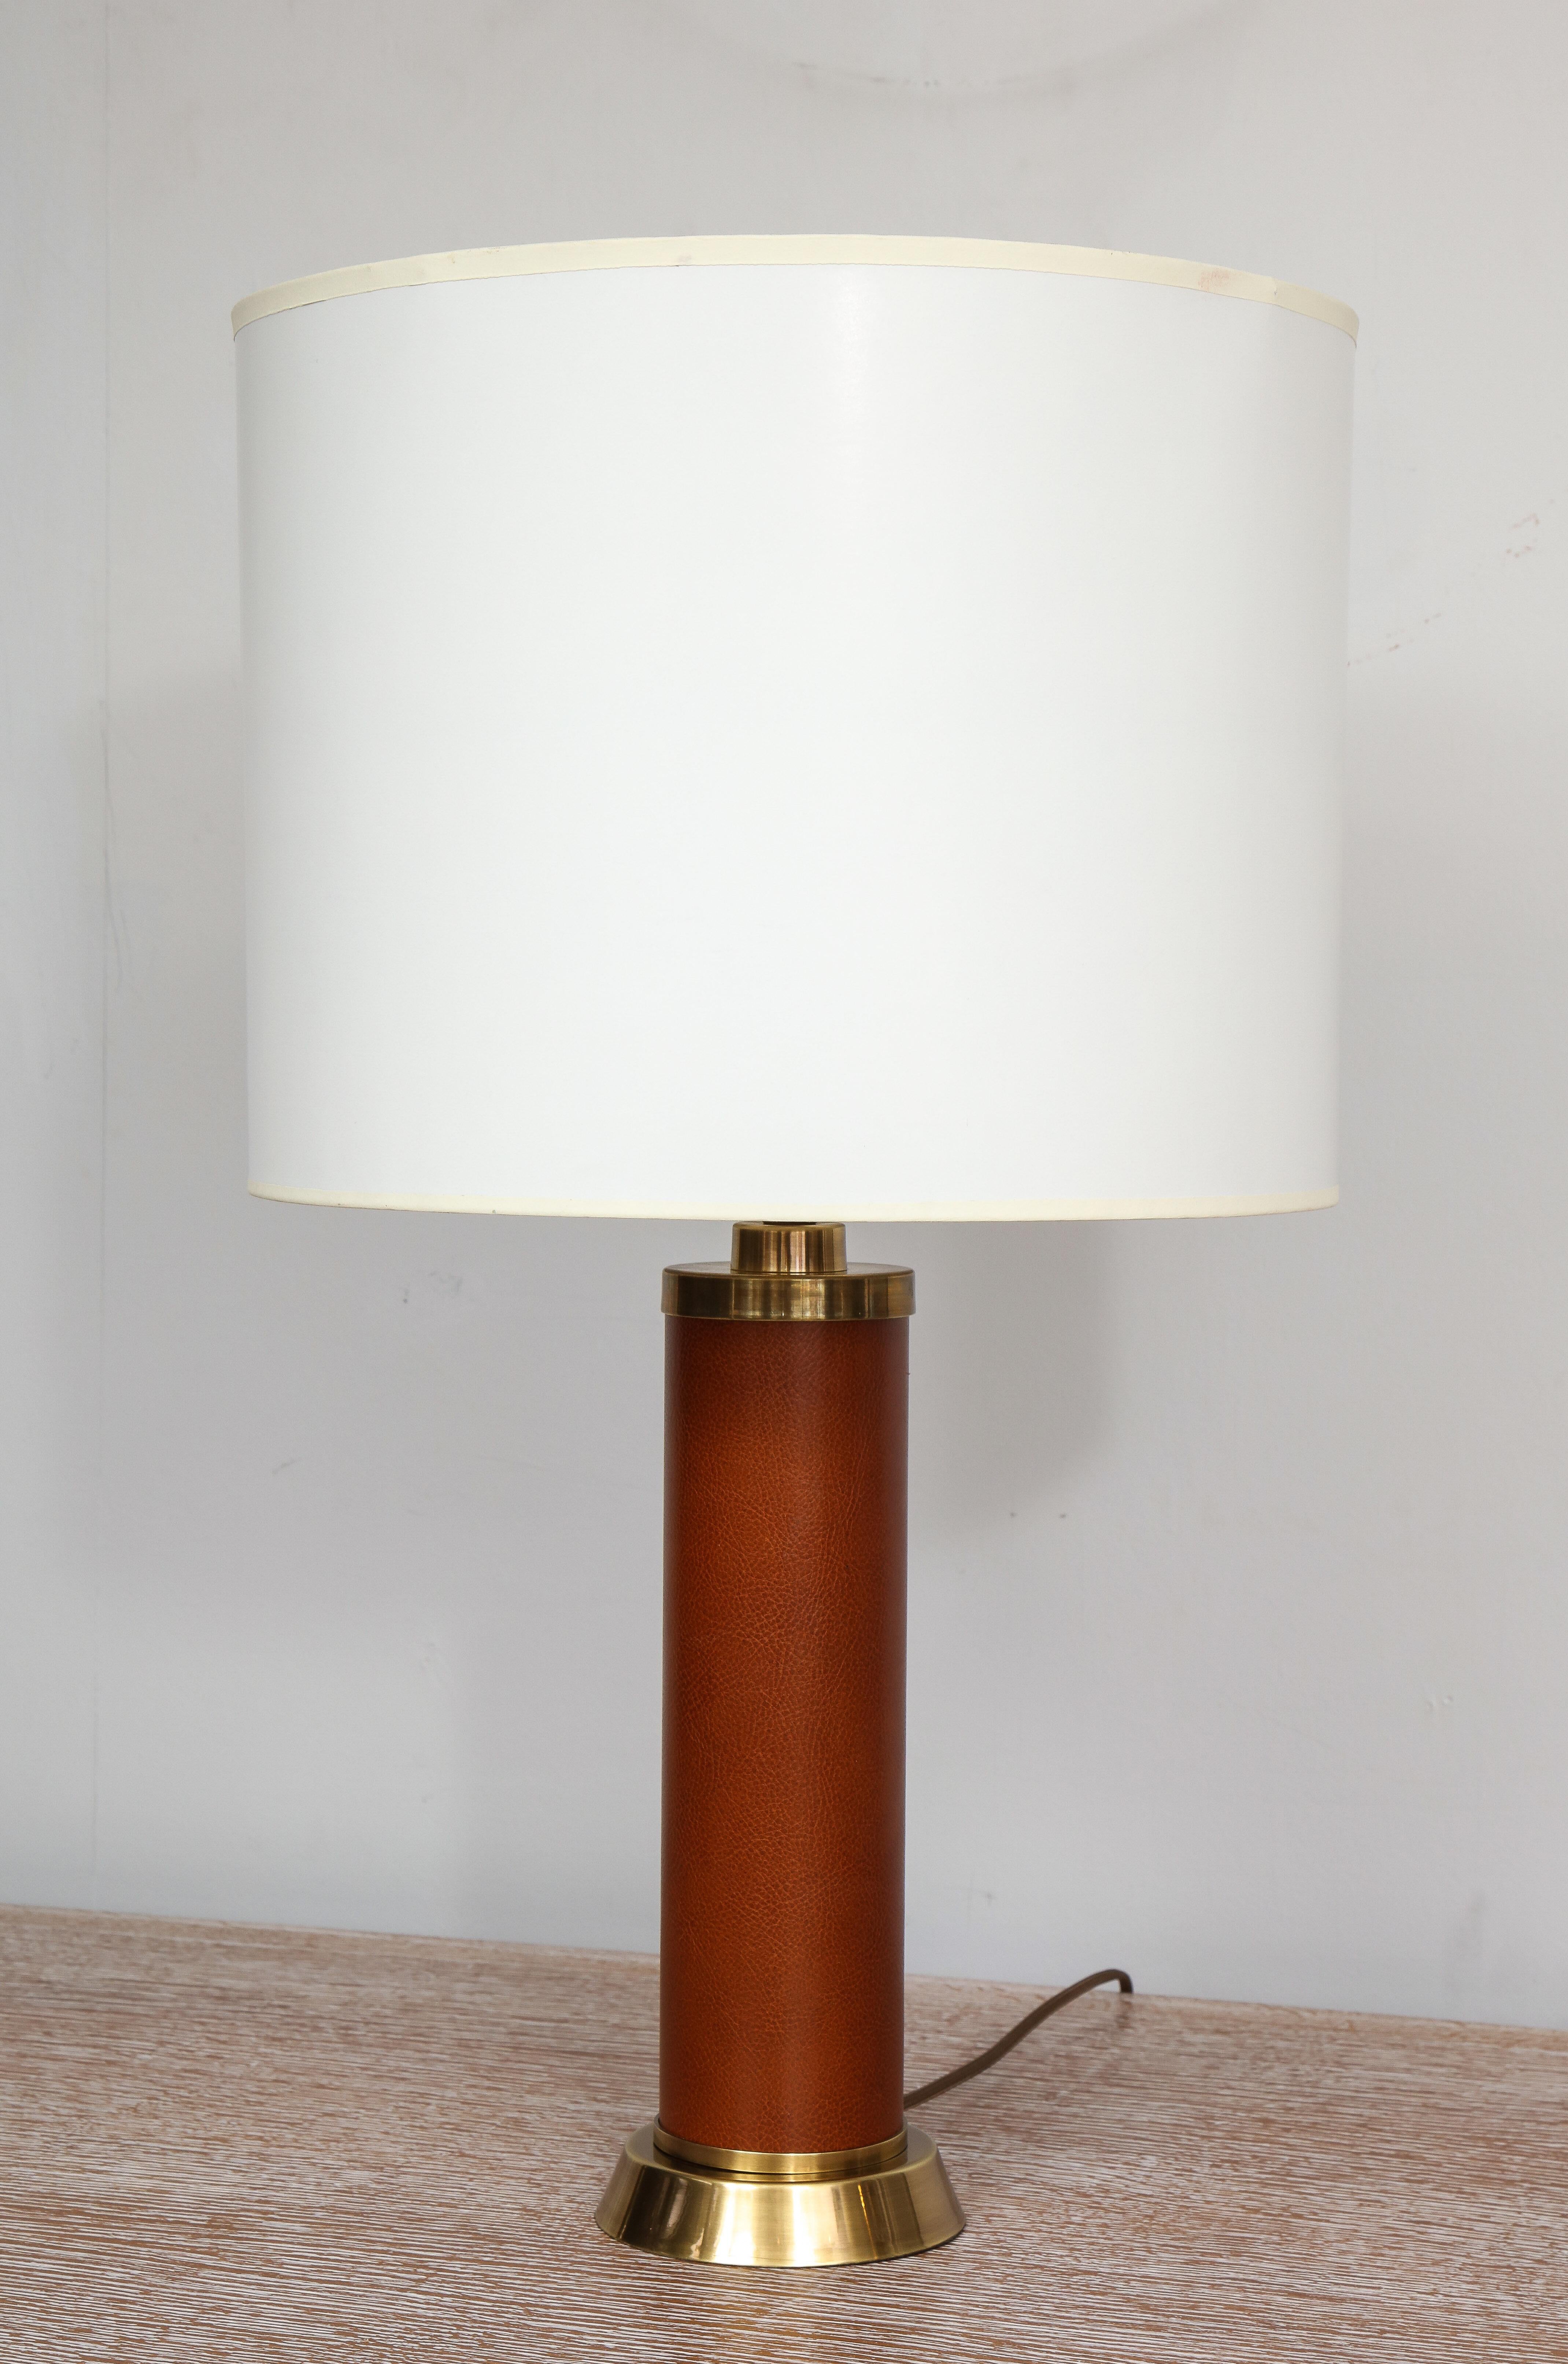 Custom handstitched leather and brass lamp. 
Please note that this lamp is customizable.
Lead Time is 8-10 weeks.